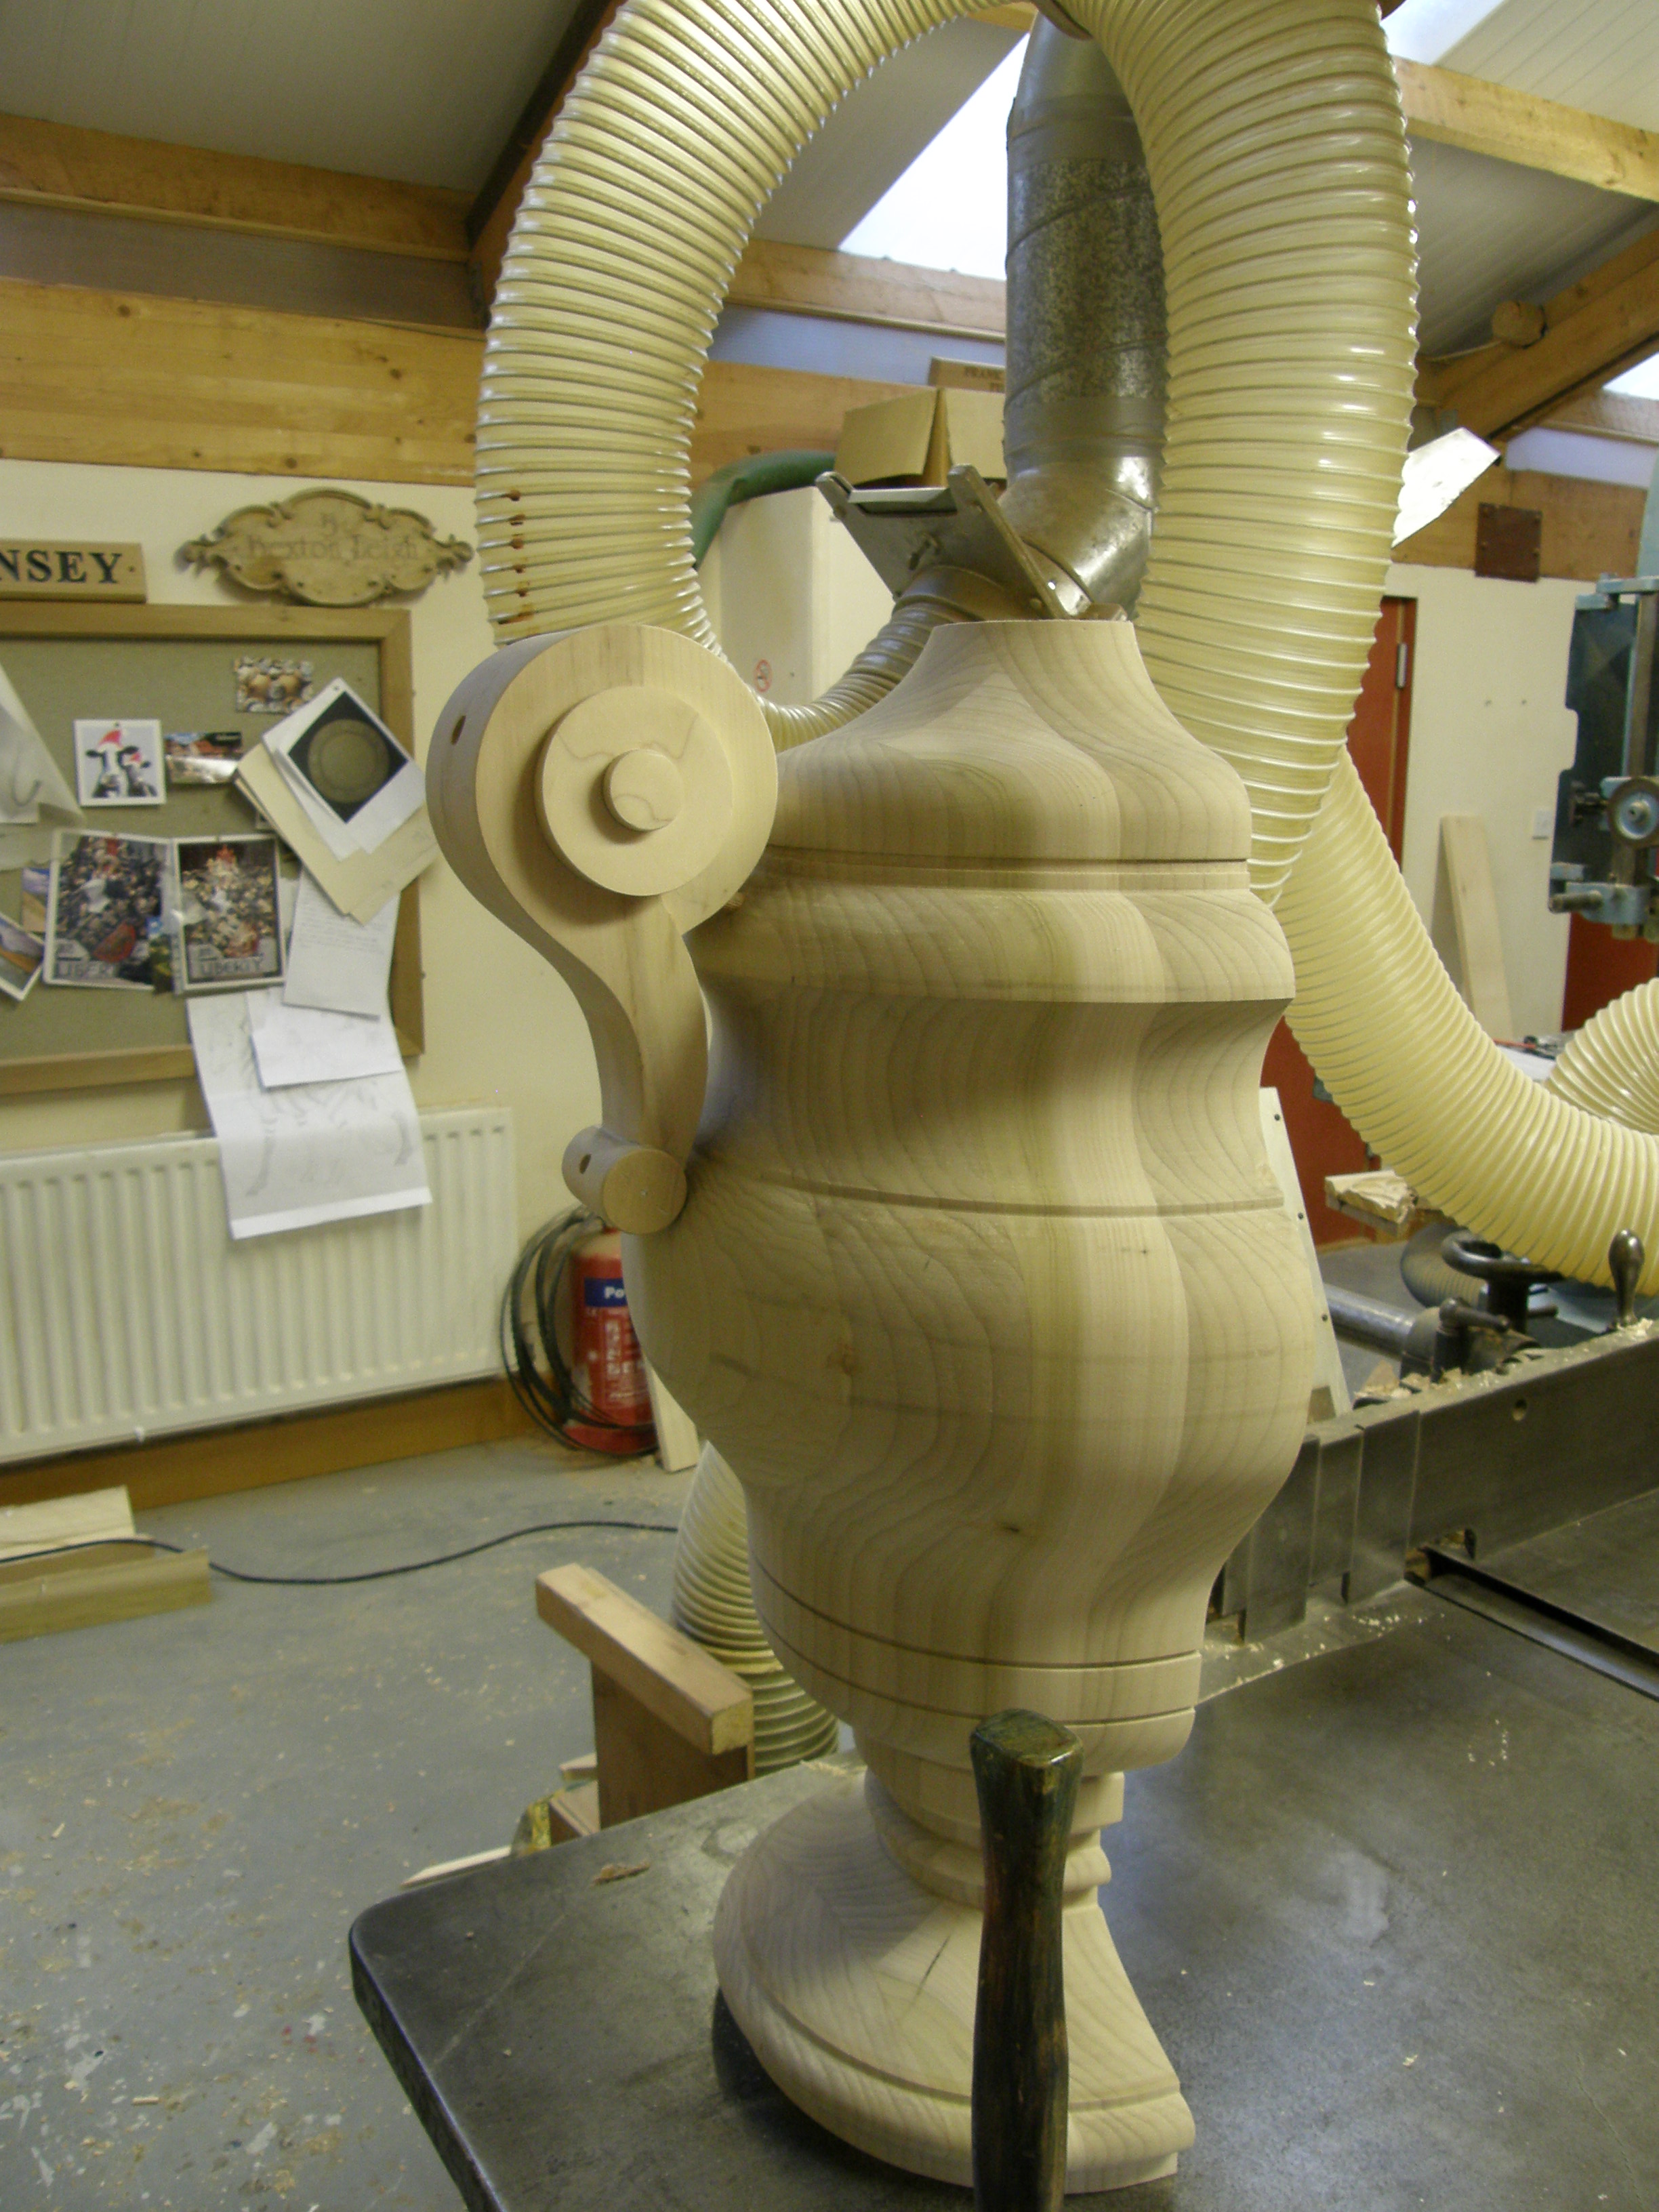 Urn Sculpture commission carried out for Juicy Couture